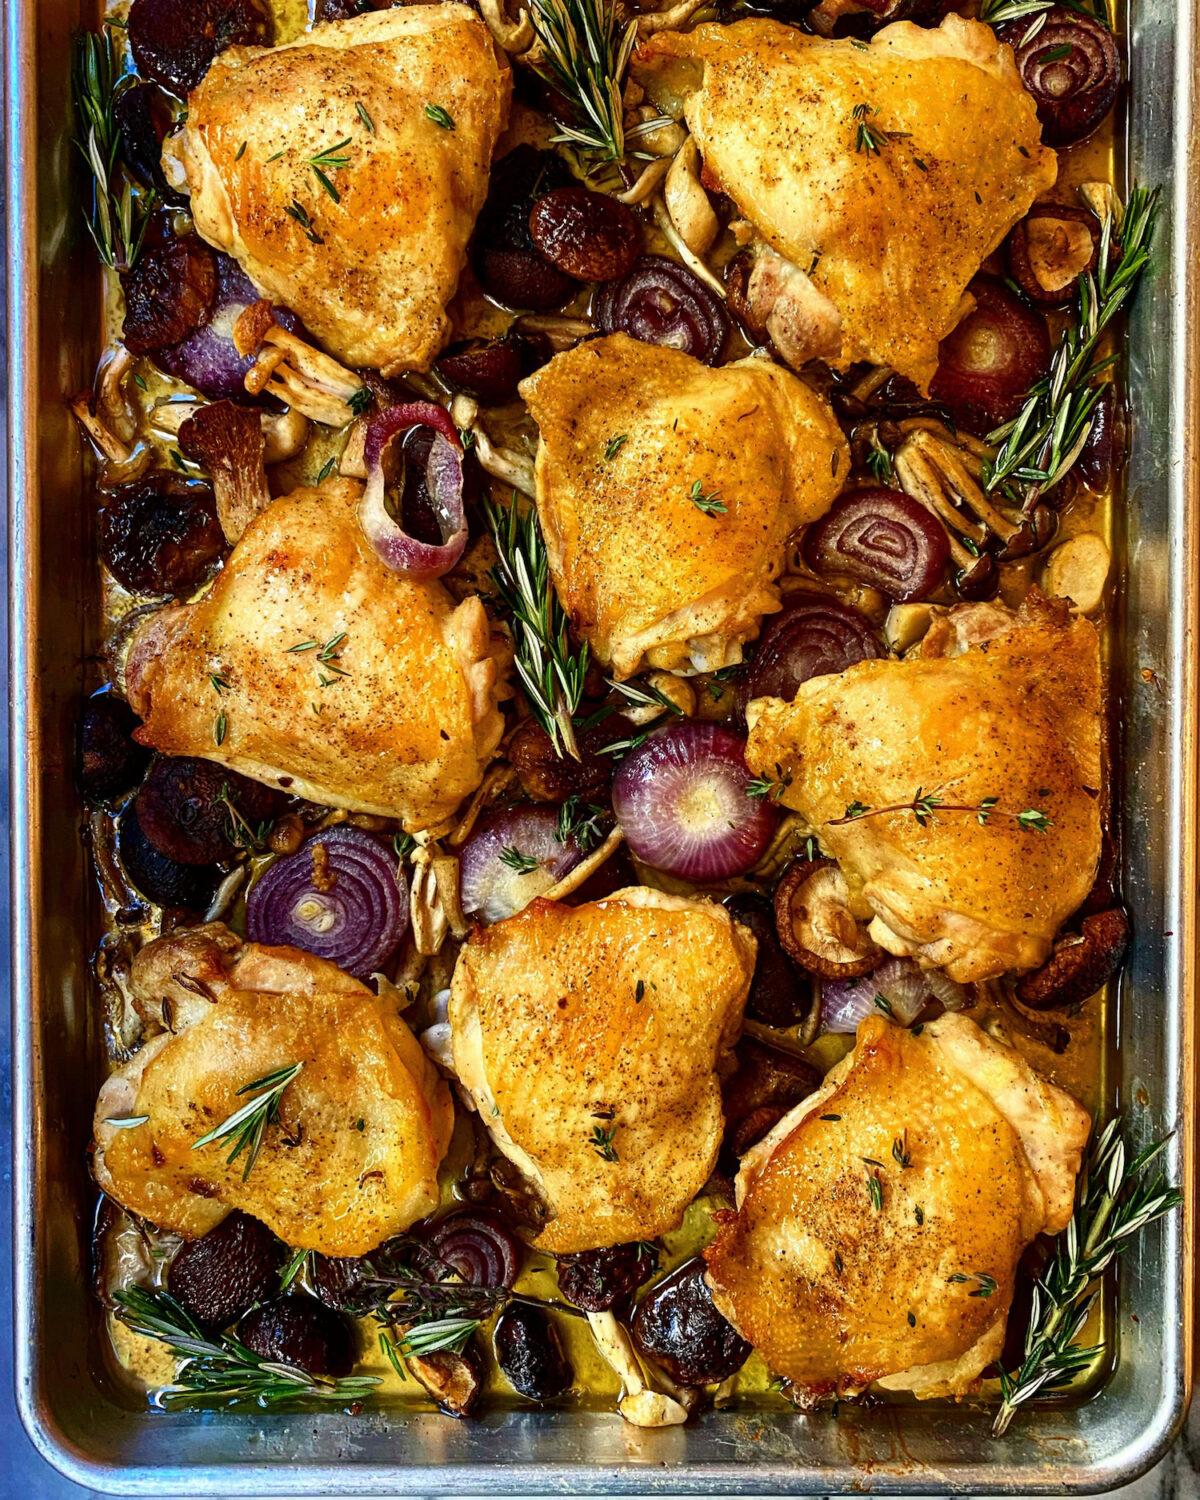 The flavors of chicken, sweet cipollini onions, umami-packed mushrooms, and fresh rosemary and thyme mingle in this one-pan wonder. (Lynda Balslev for Tastefood)